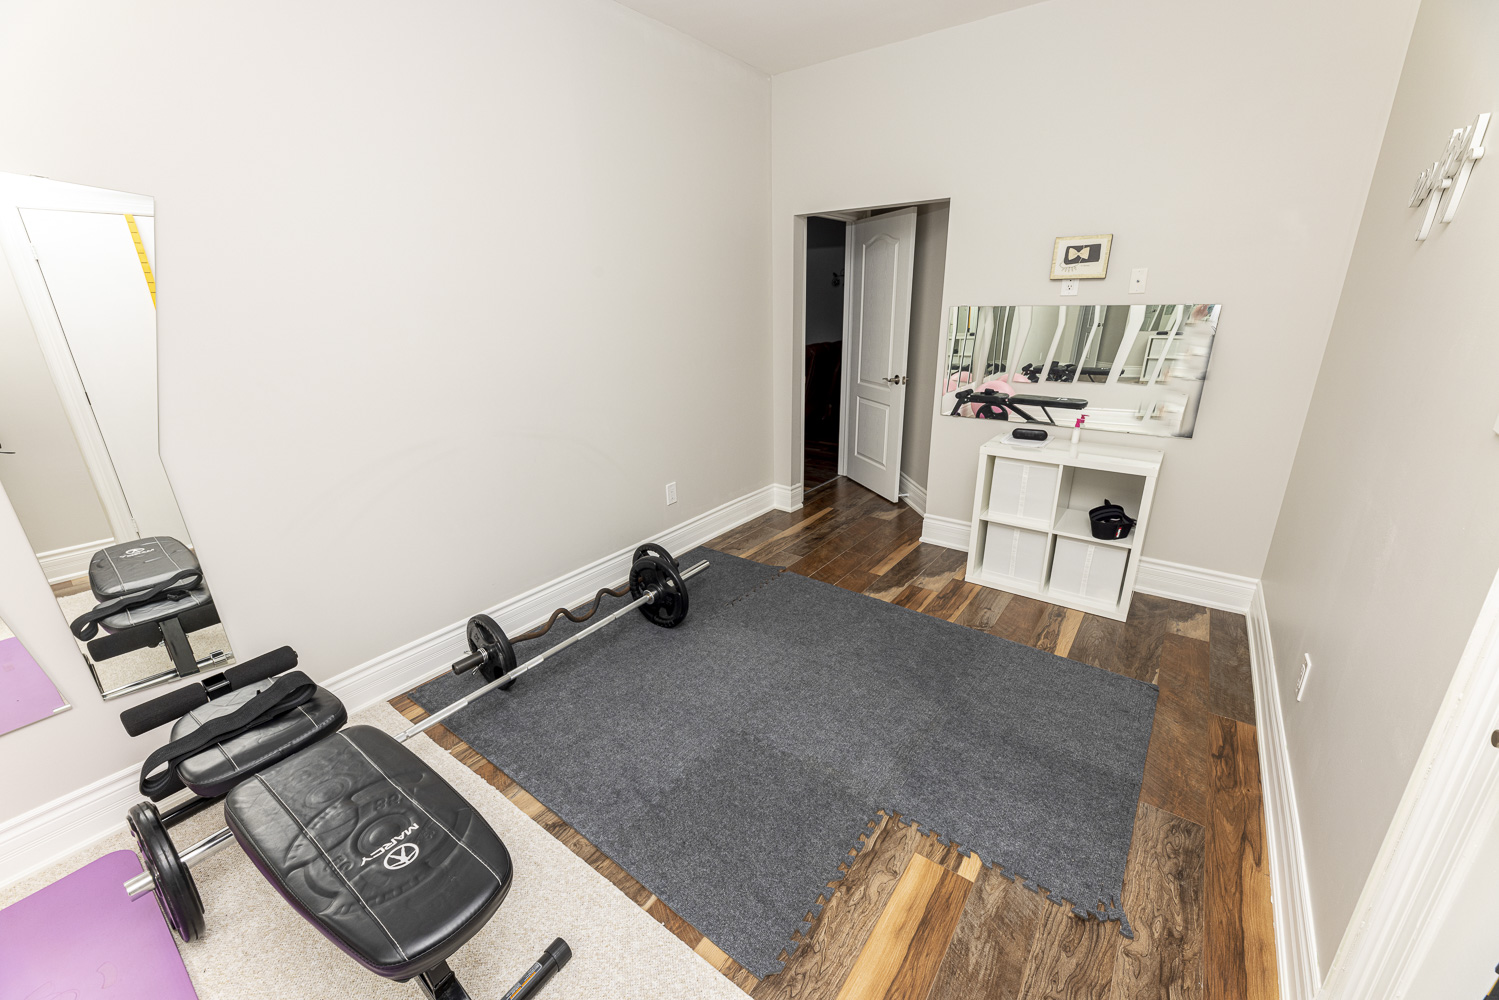 Exercise Room In Law Suite